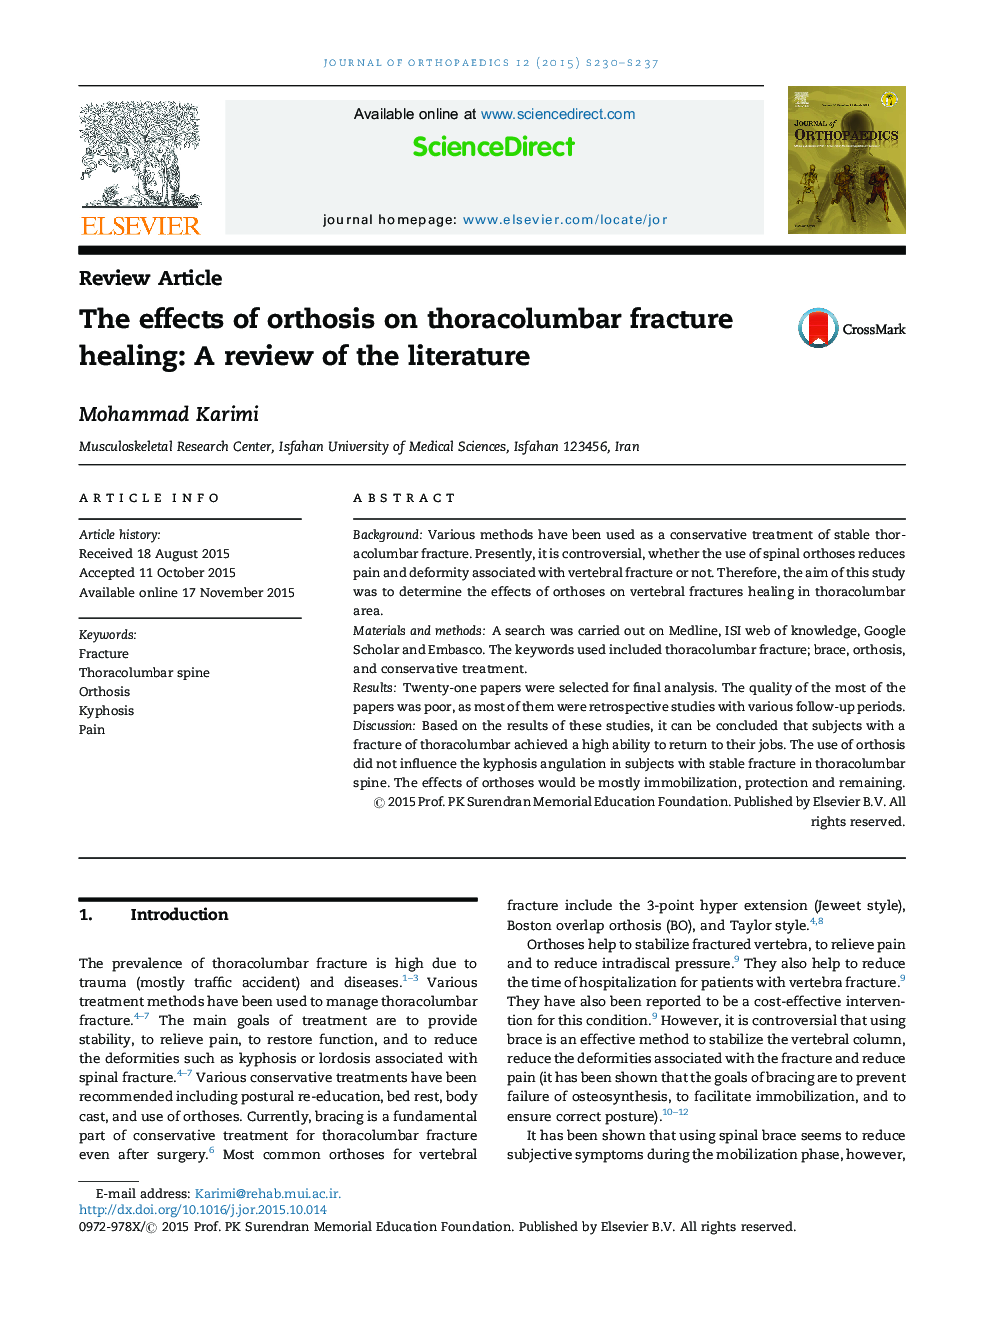 The effects of orthosis on thoracolumbar fracture healing: A review of the literature